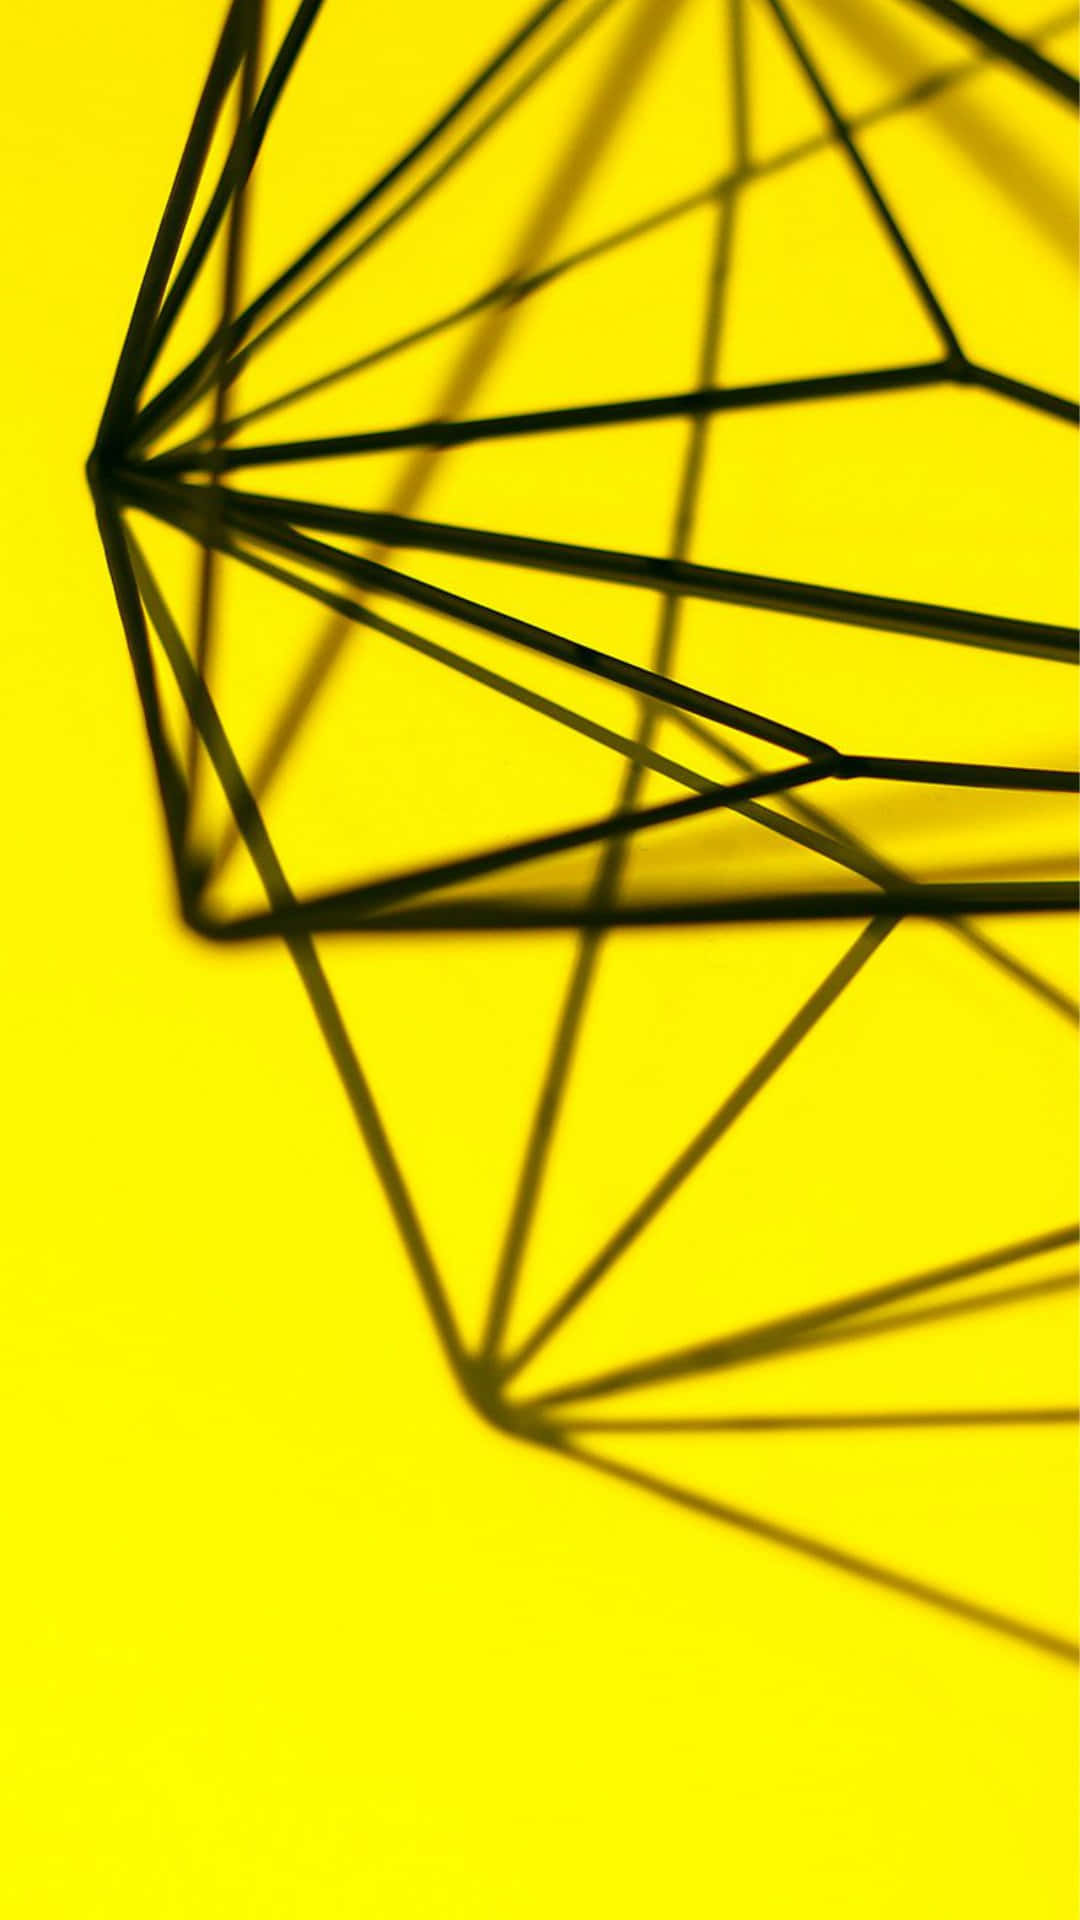 A Black And Yellow Geometric Shape On A Yellow Background